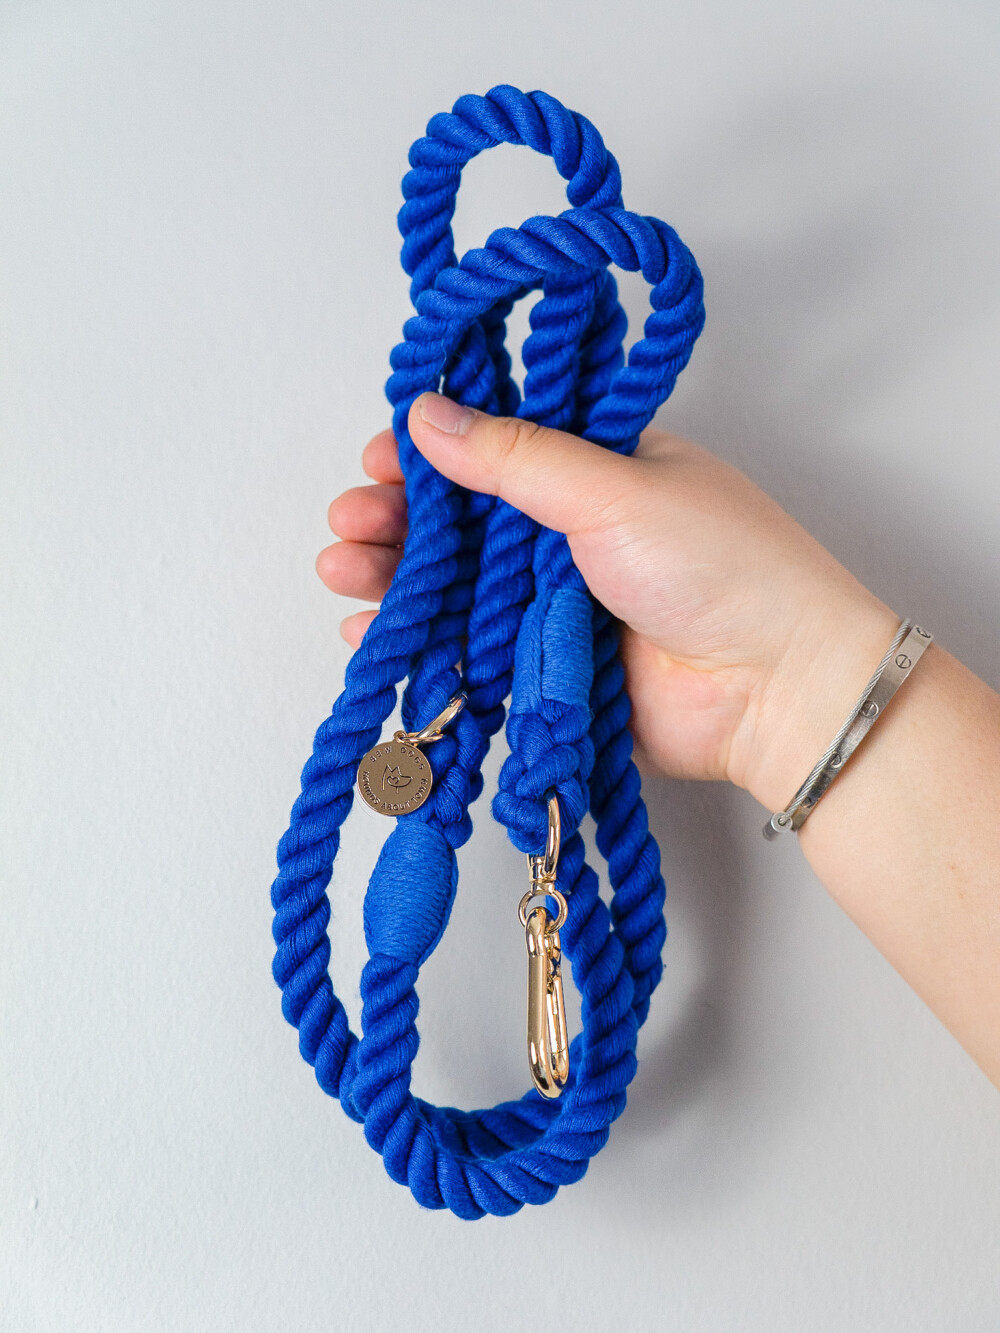 a navy blue lead being held against a white background.